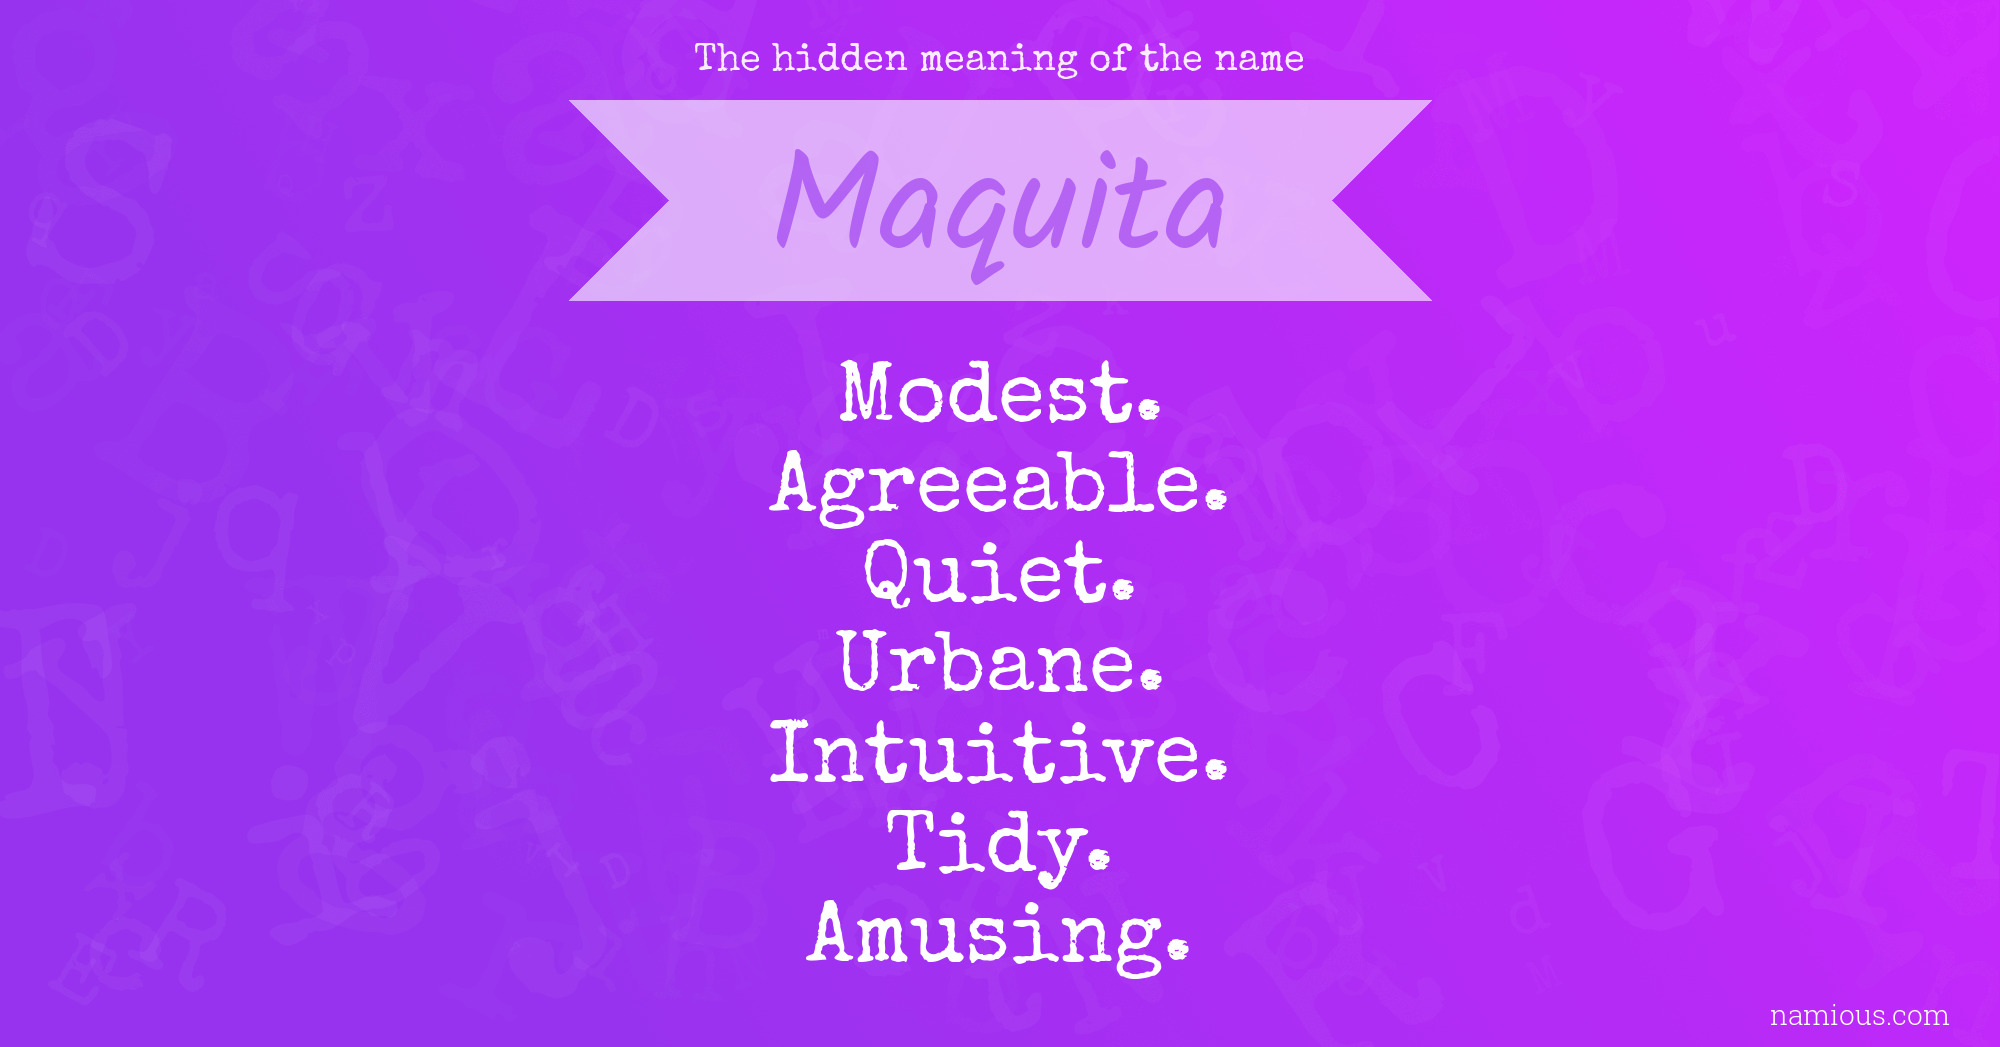 The hidden meaning of the name Maquita